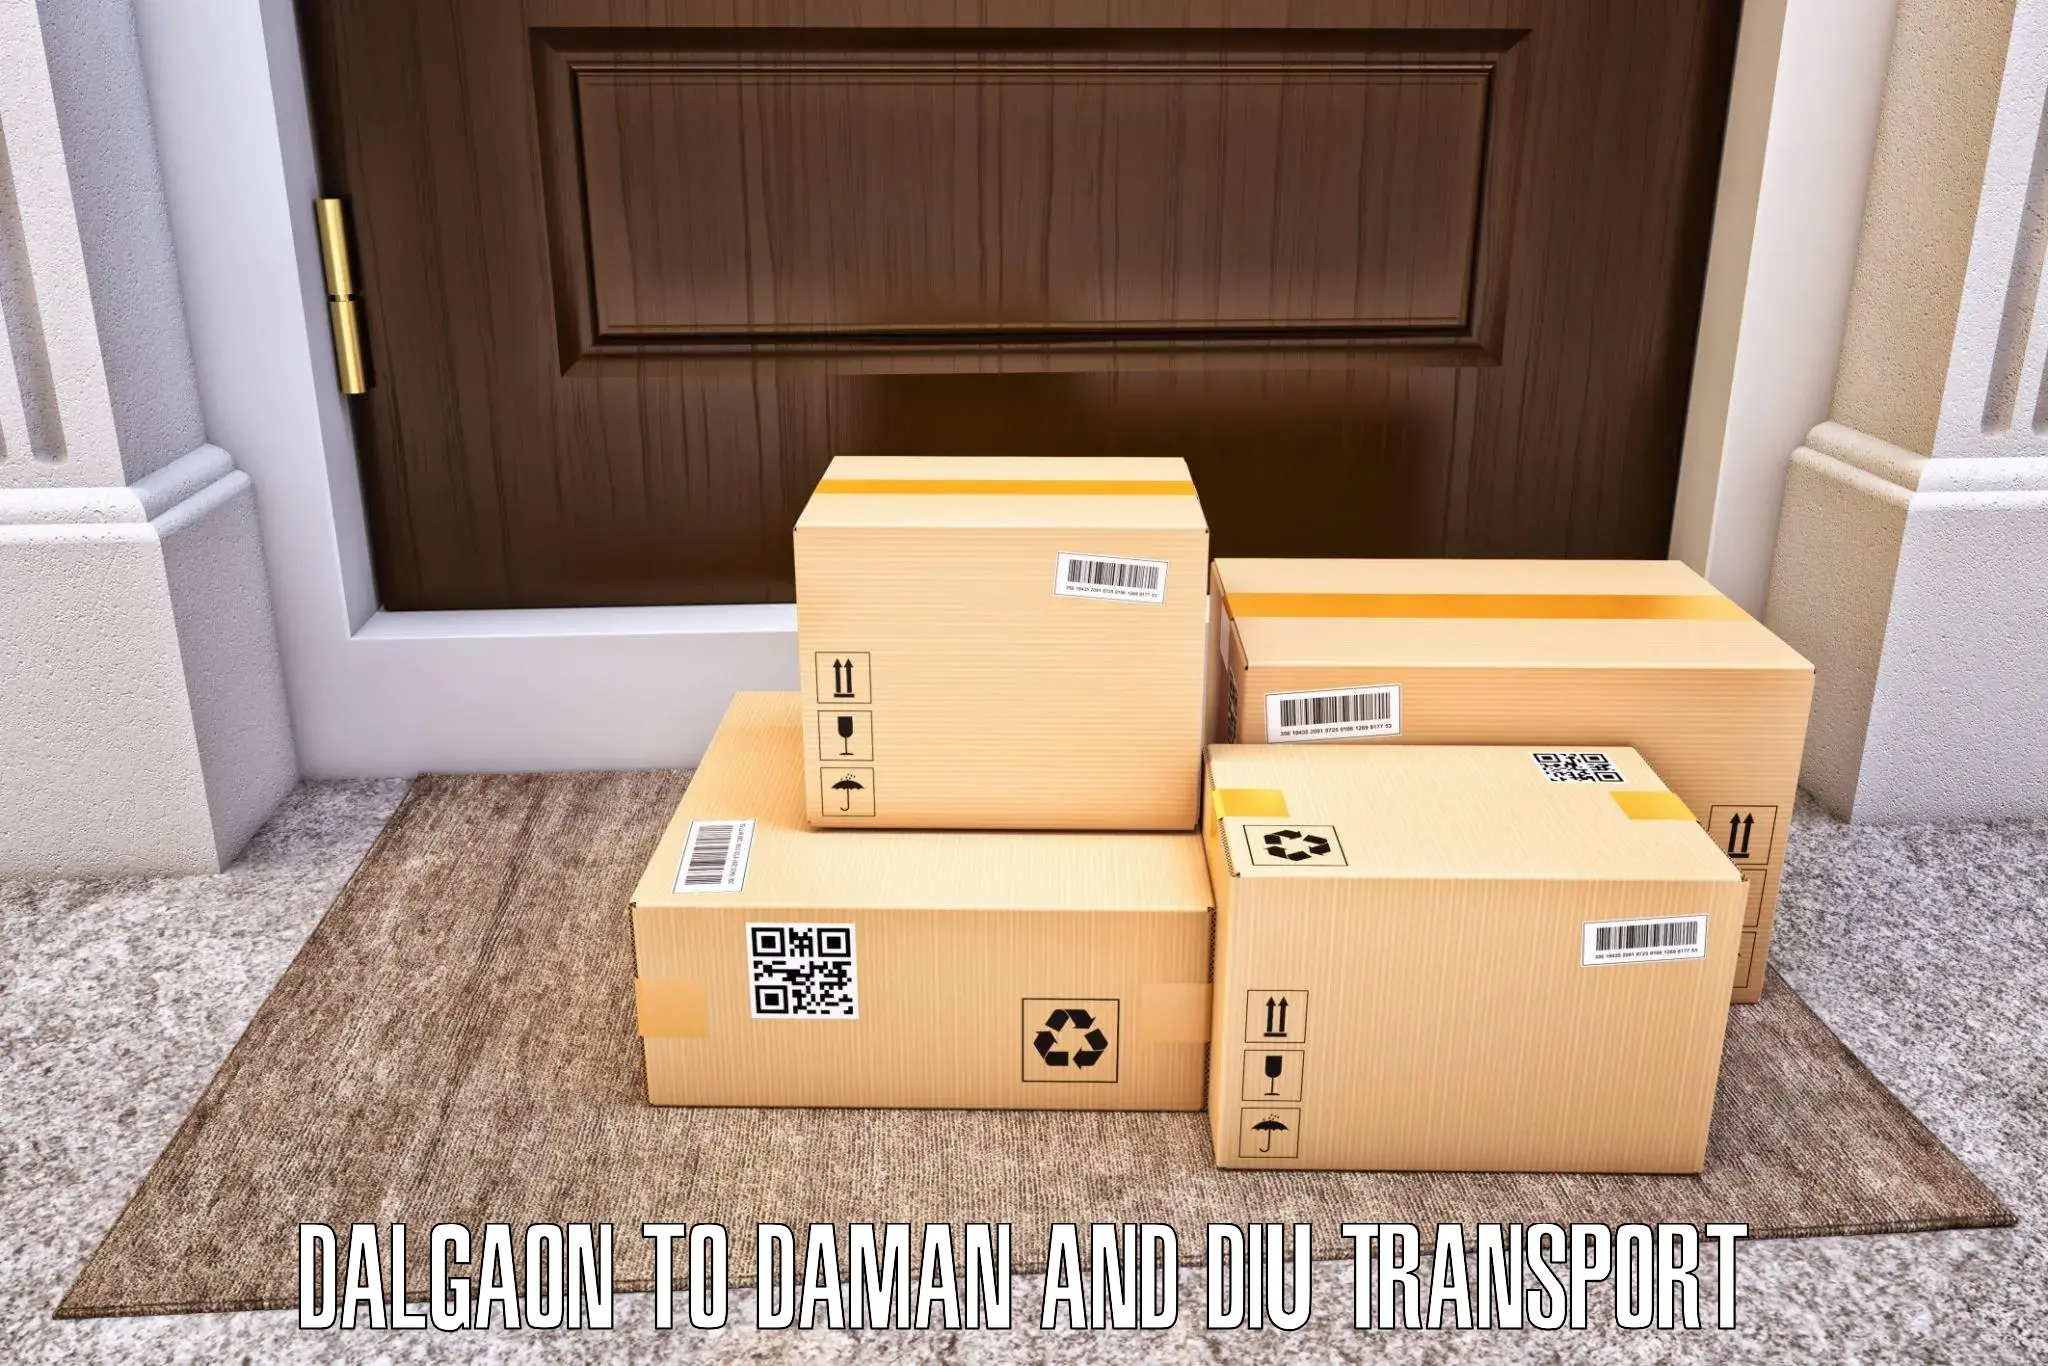 Parcel transport services Dalgaon to Daman and Diu